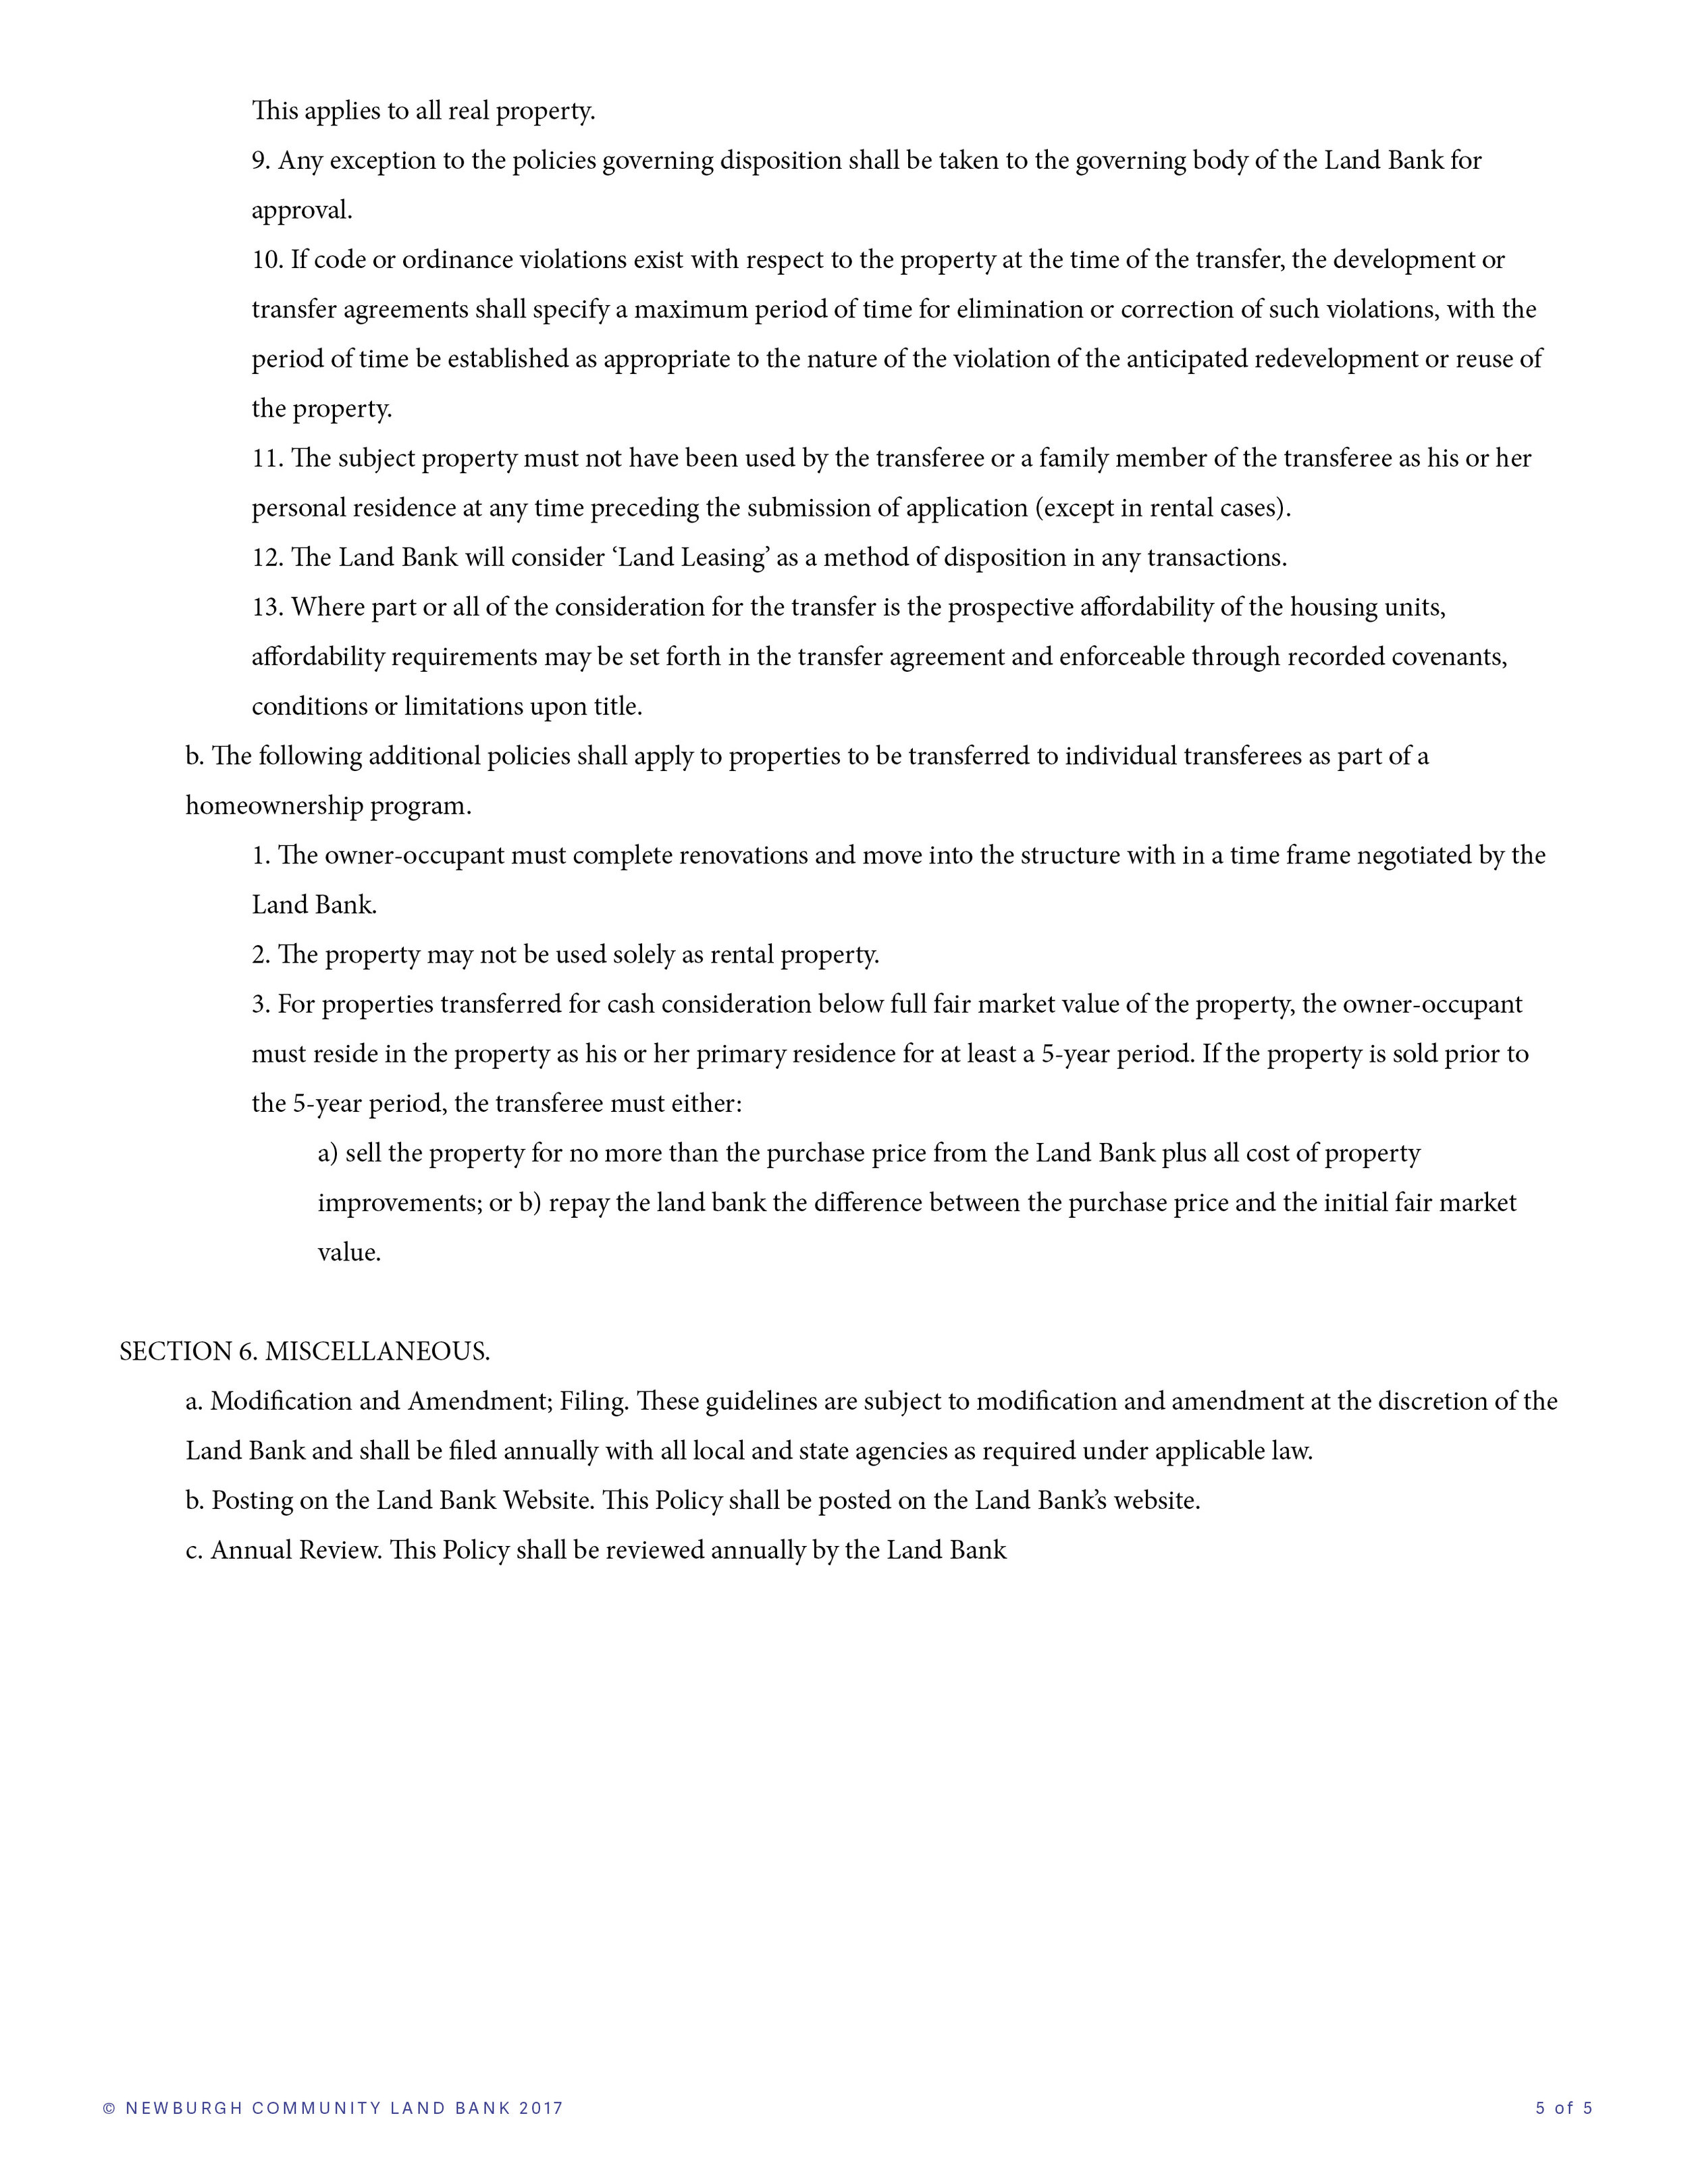 NCLB Disposition Policy5.jpg